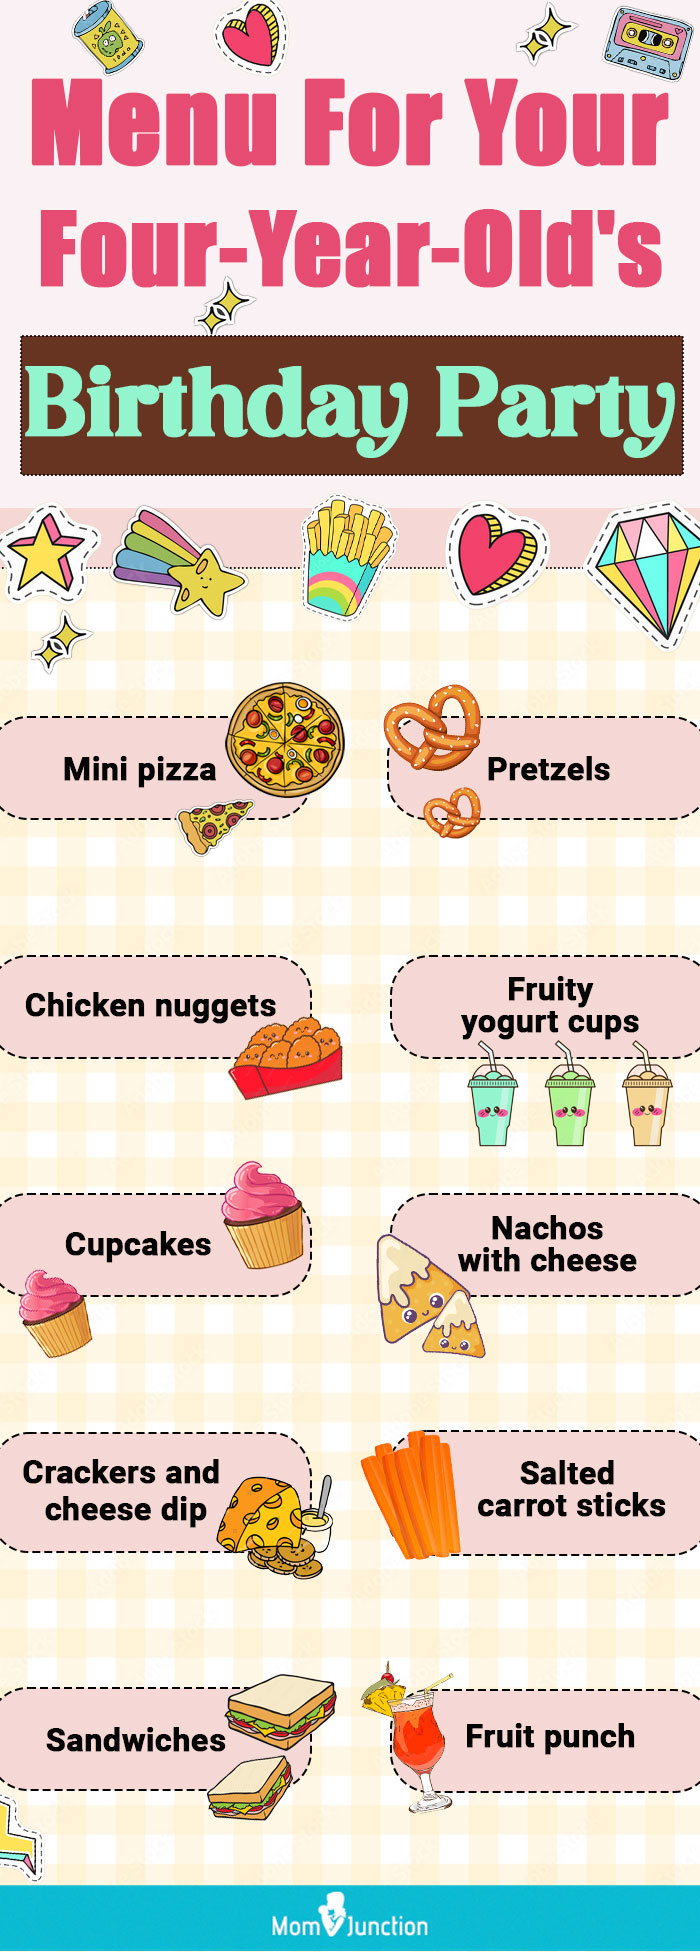 food ideas for a four year olds birthday (infographic)